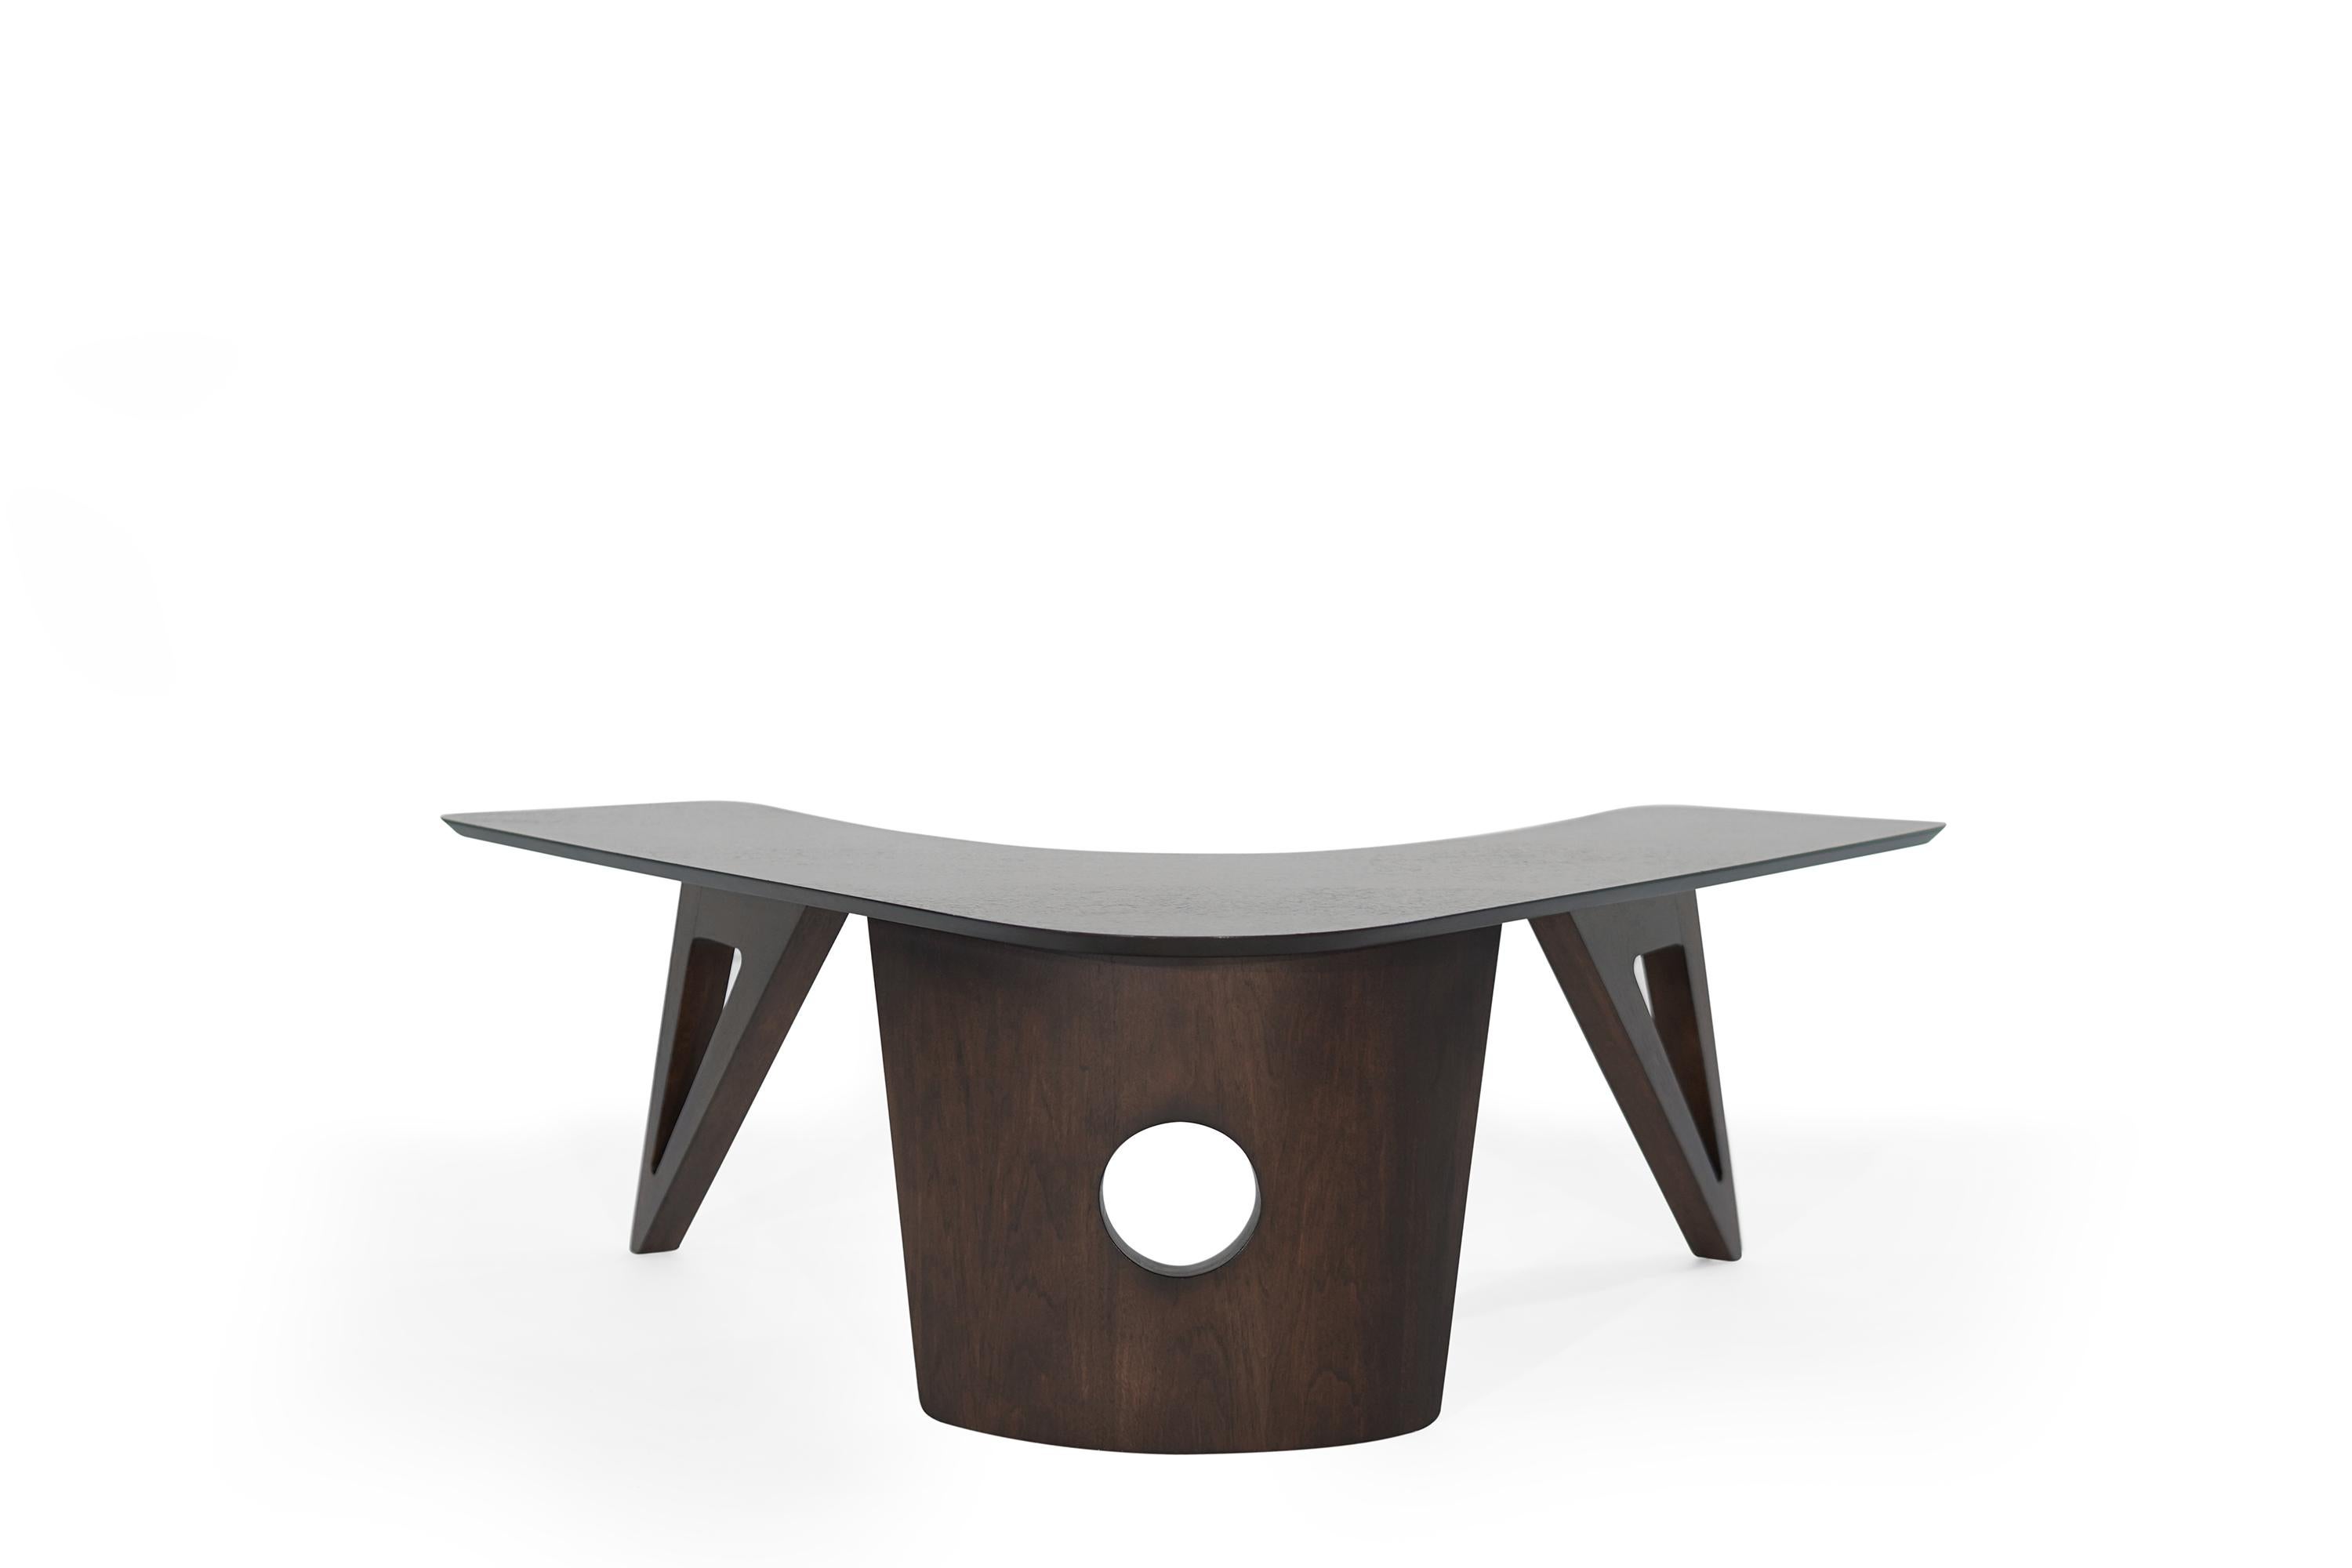 Walnut coffee table featuring a boomerang-shaped top, fully restored to its original espresso finish.